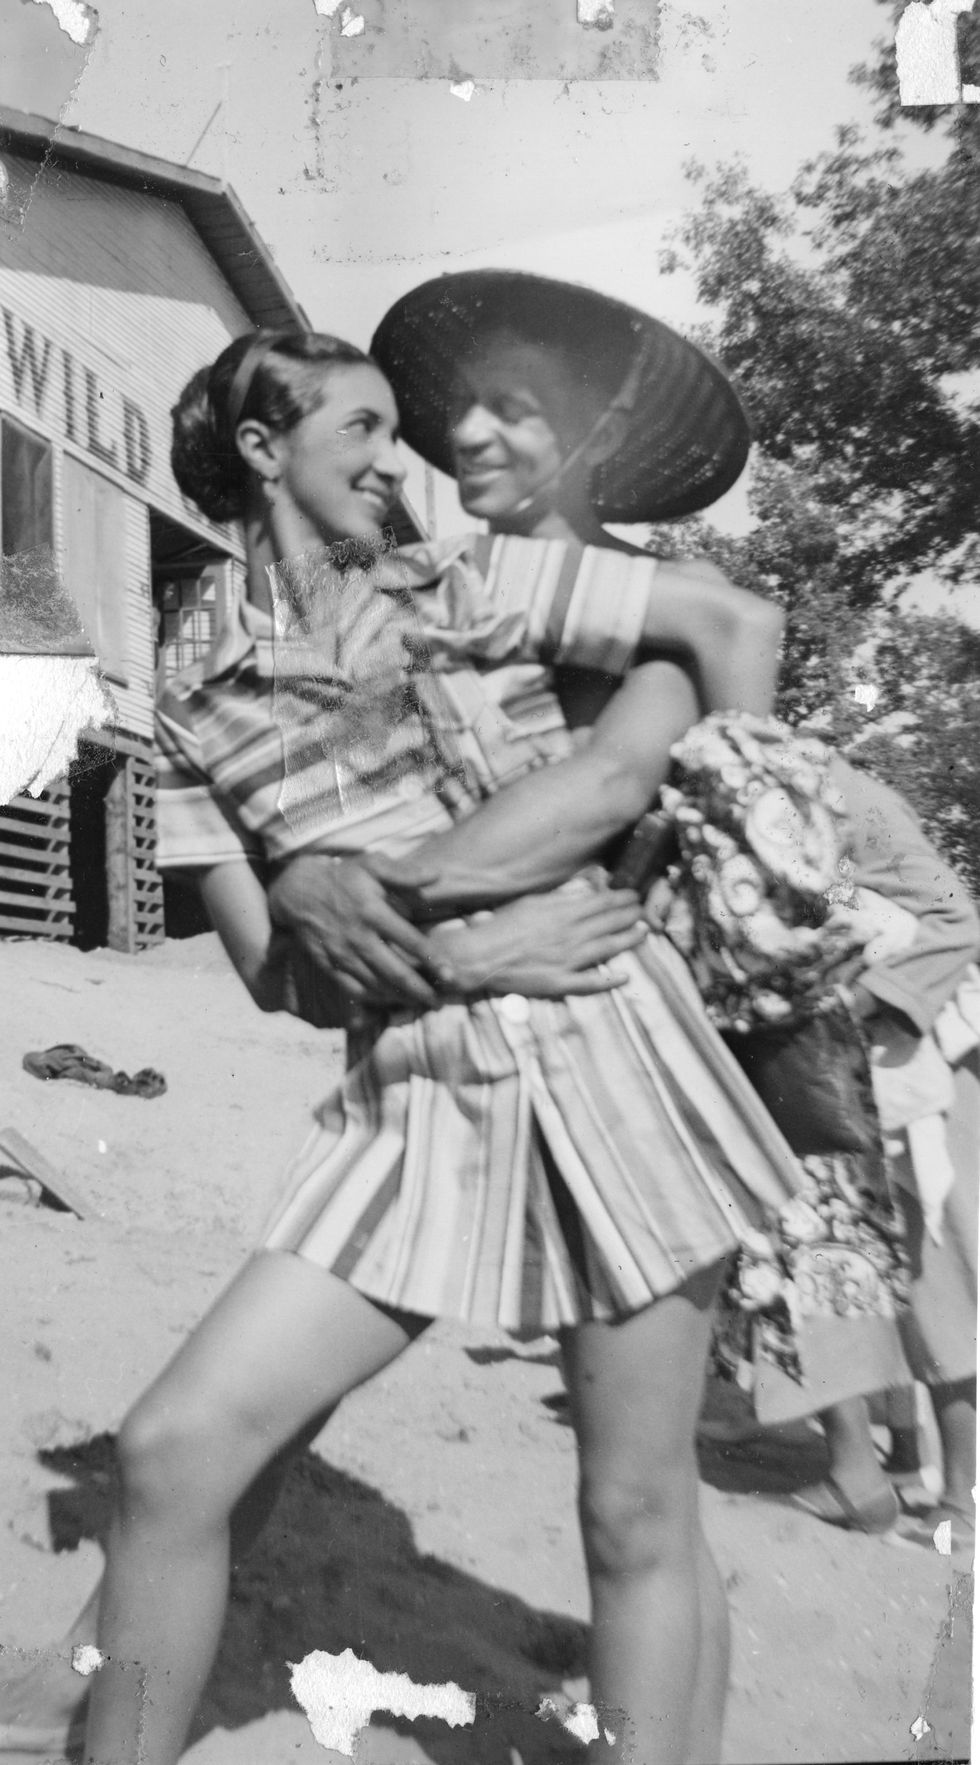 portrait of a smiling couple friends andor family members of future newspaper publisher john h sengstacke as they embrace on the beach outside the idlewild club house, idlewild, michigan, september 1938 idlewild, known as the black eden, was a resort community that catered to african americans, who were excluded from other resorts prior to the passage of the civil rights act of 1964 photo by the abbott sengstacke family papersrobert abbott sengstackegetty images